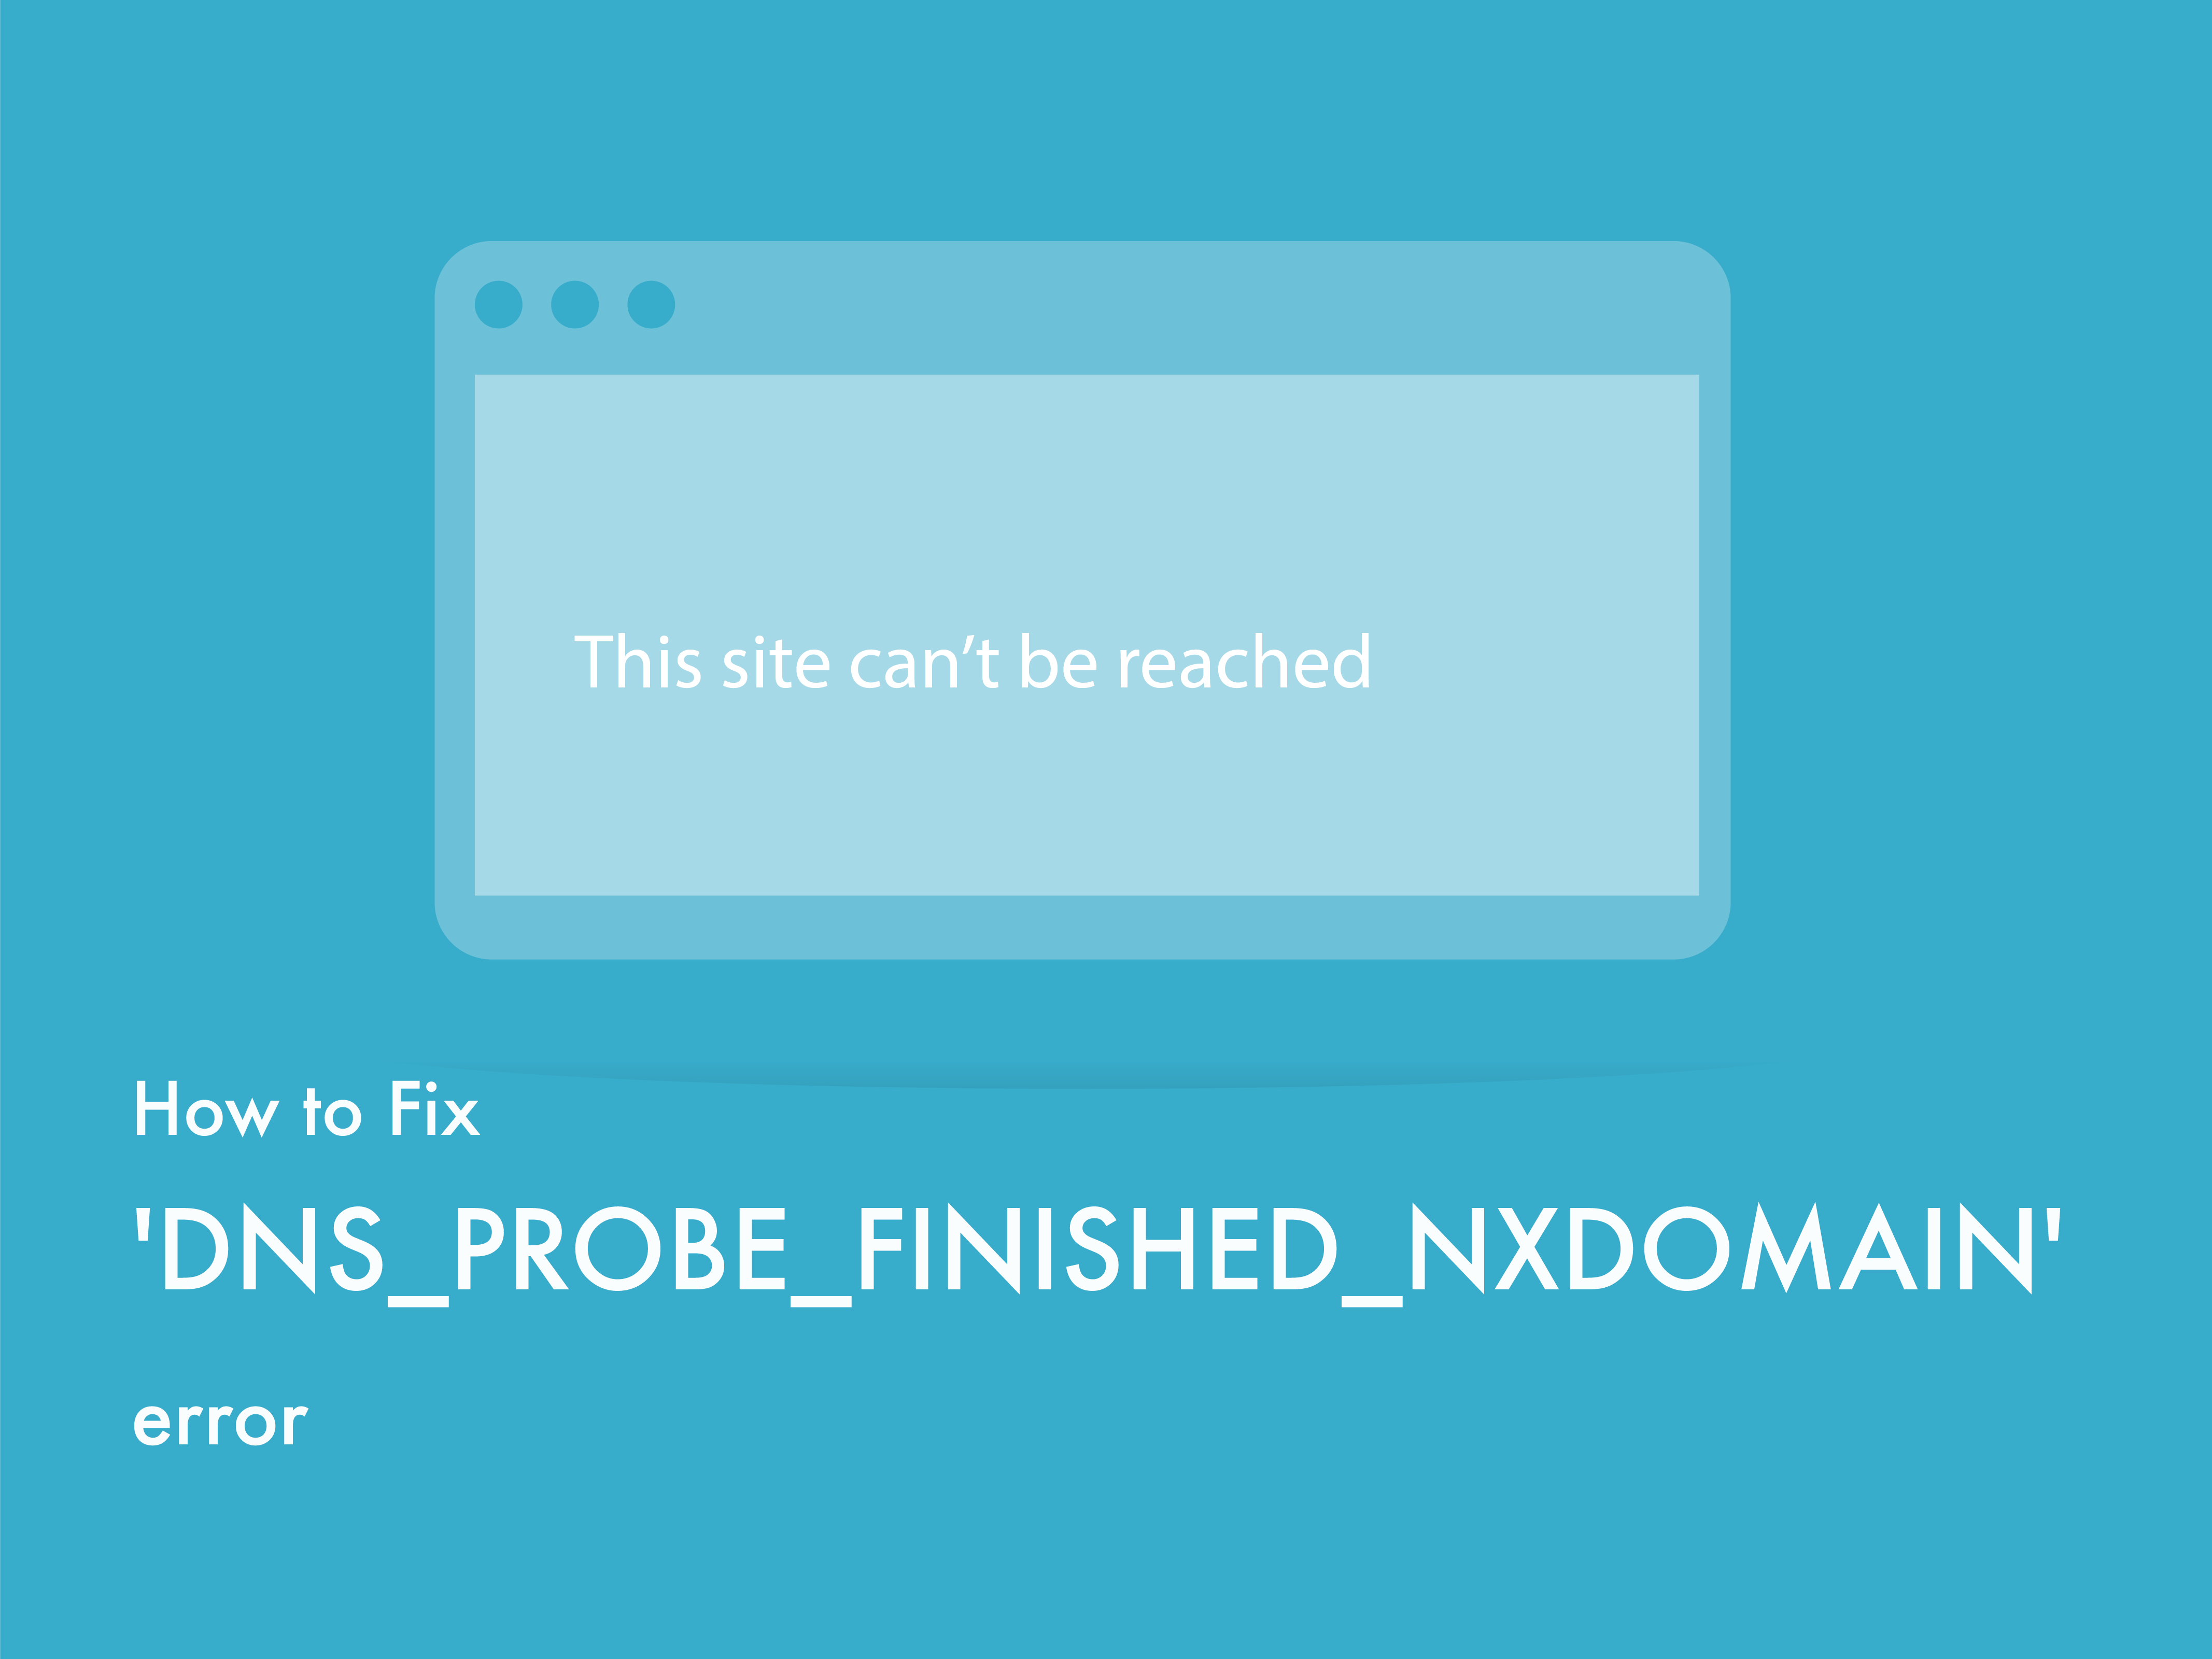 dns_probe_finished_nxdomain 特定 の サイト